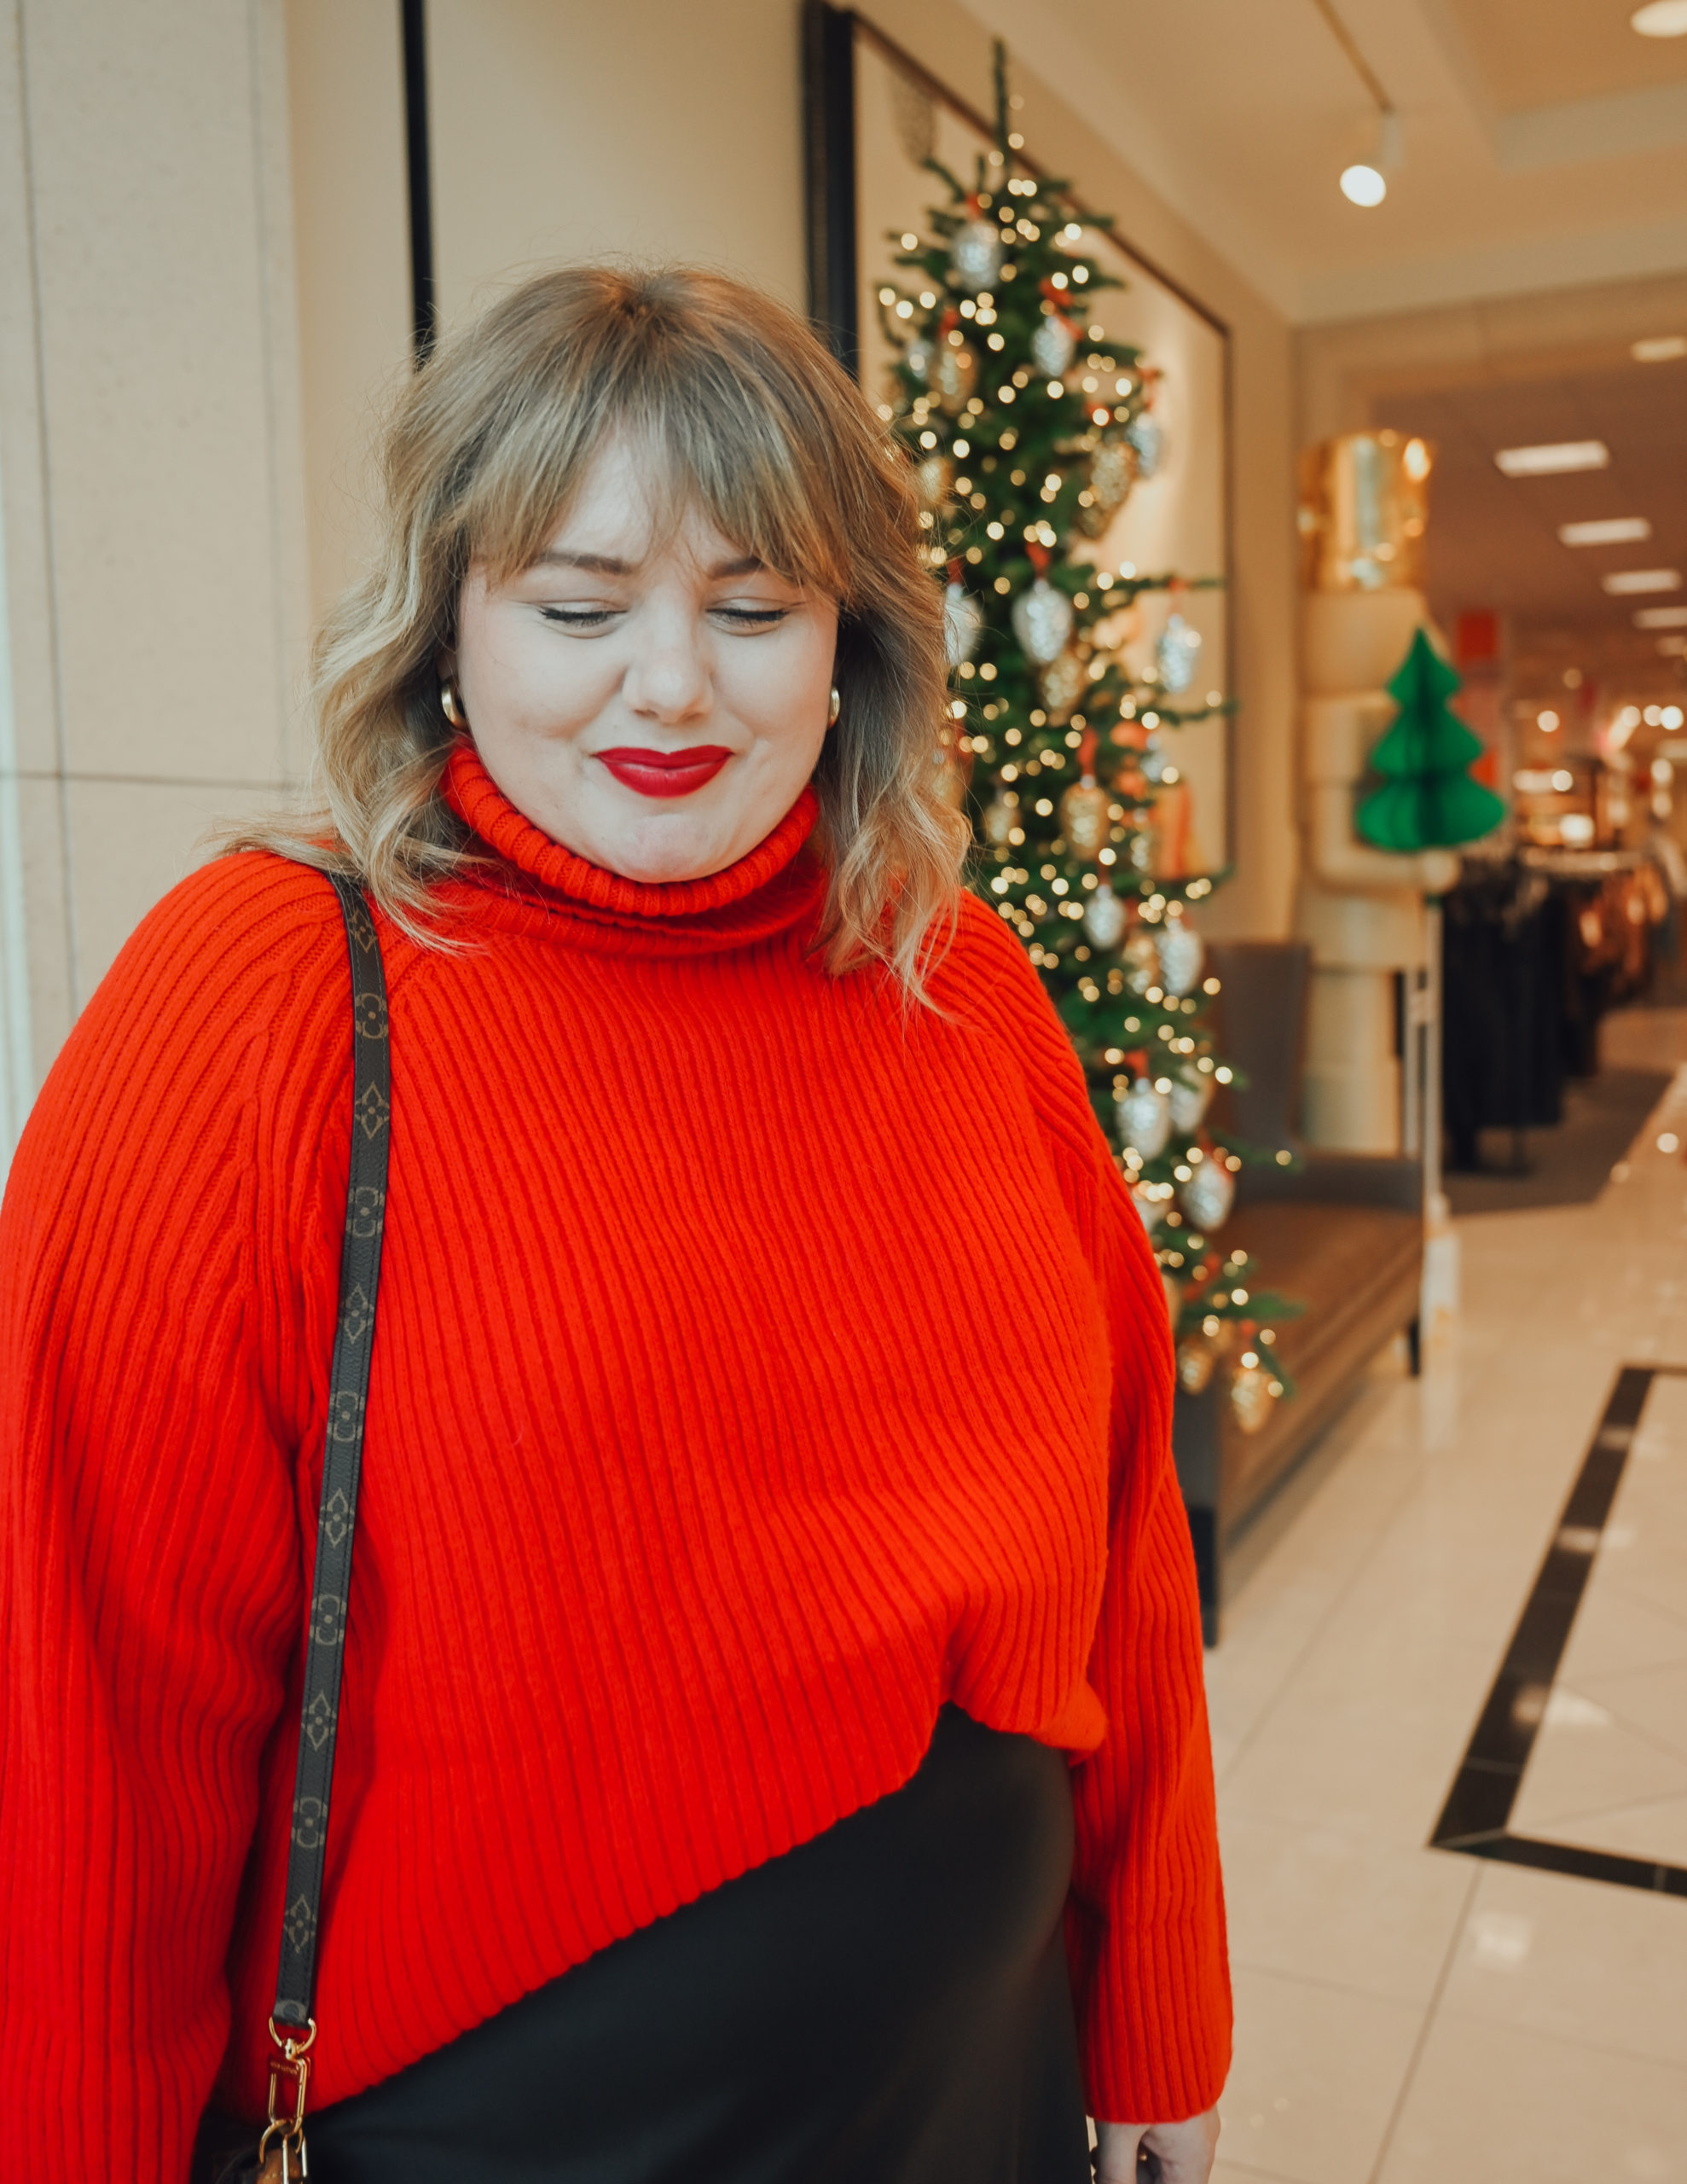 Sharing a plus size outfit that is easily dressed up for the holidays. Shop this outfit at Twelve Oaks Mall and through my blog. 